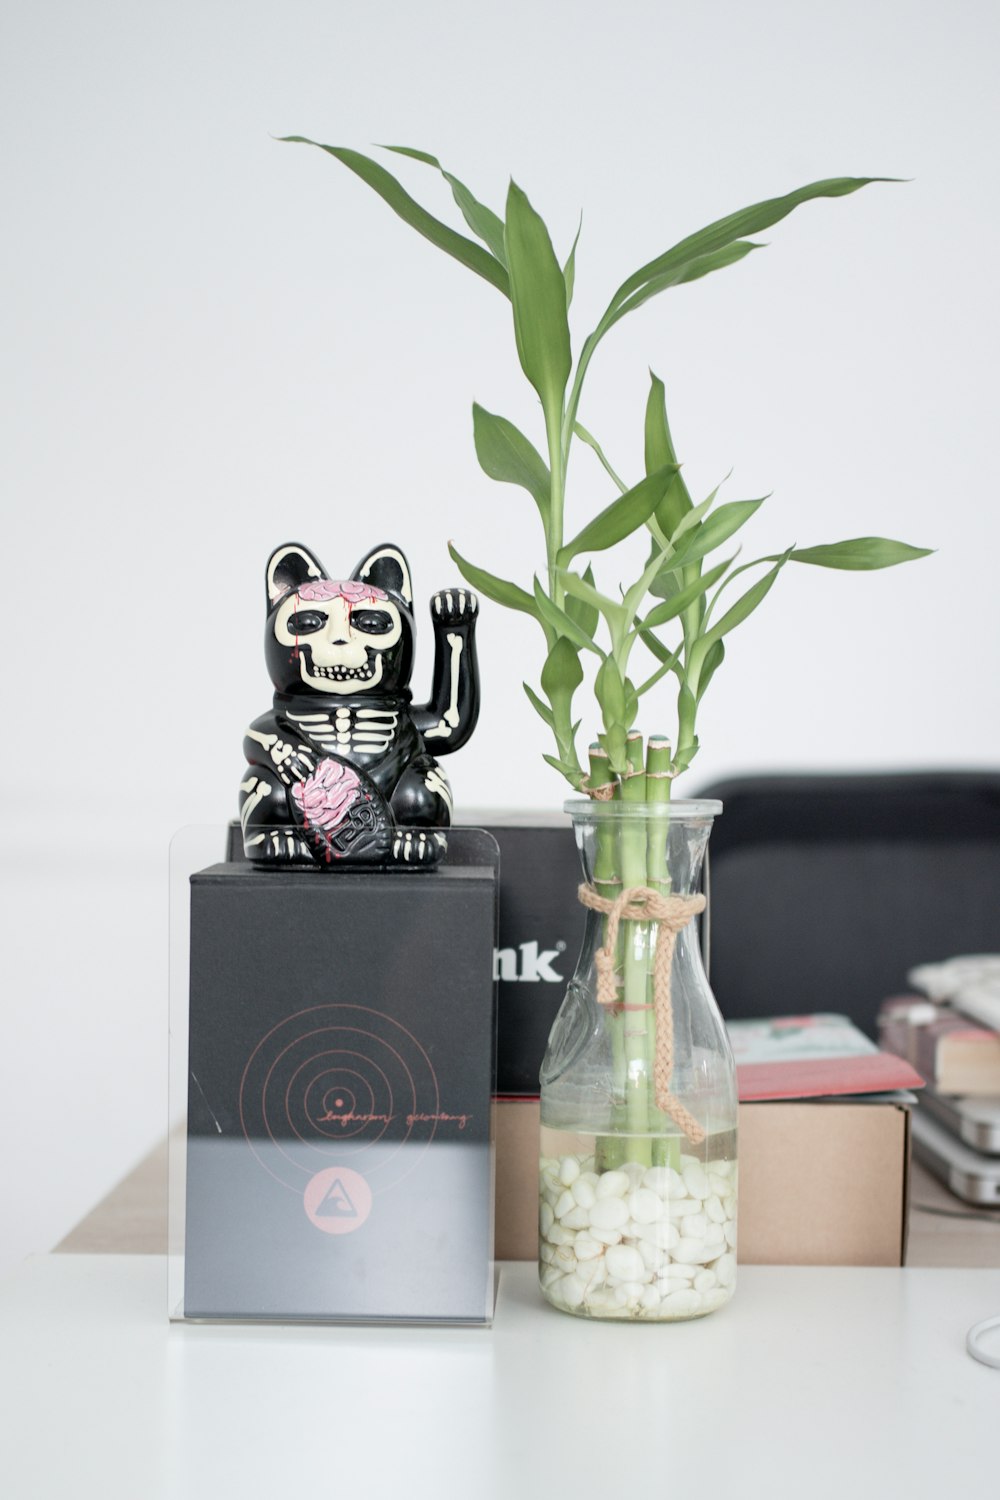 black and white box beside green plant in clear glass vase